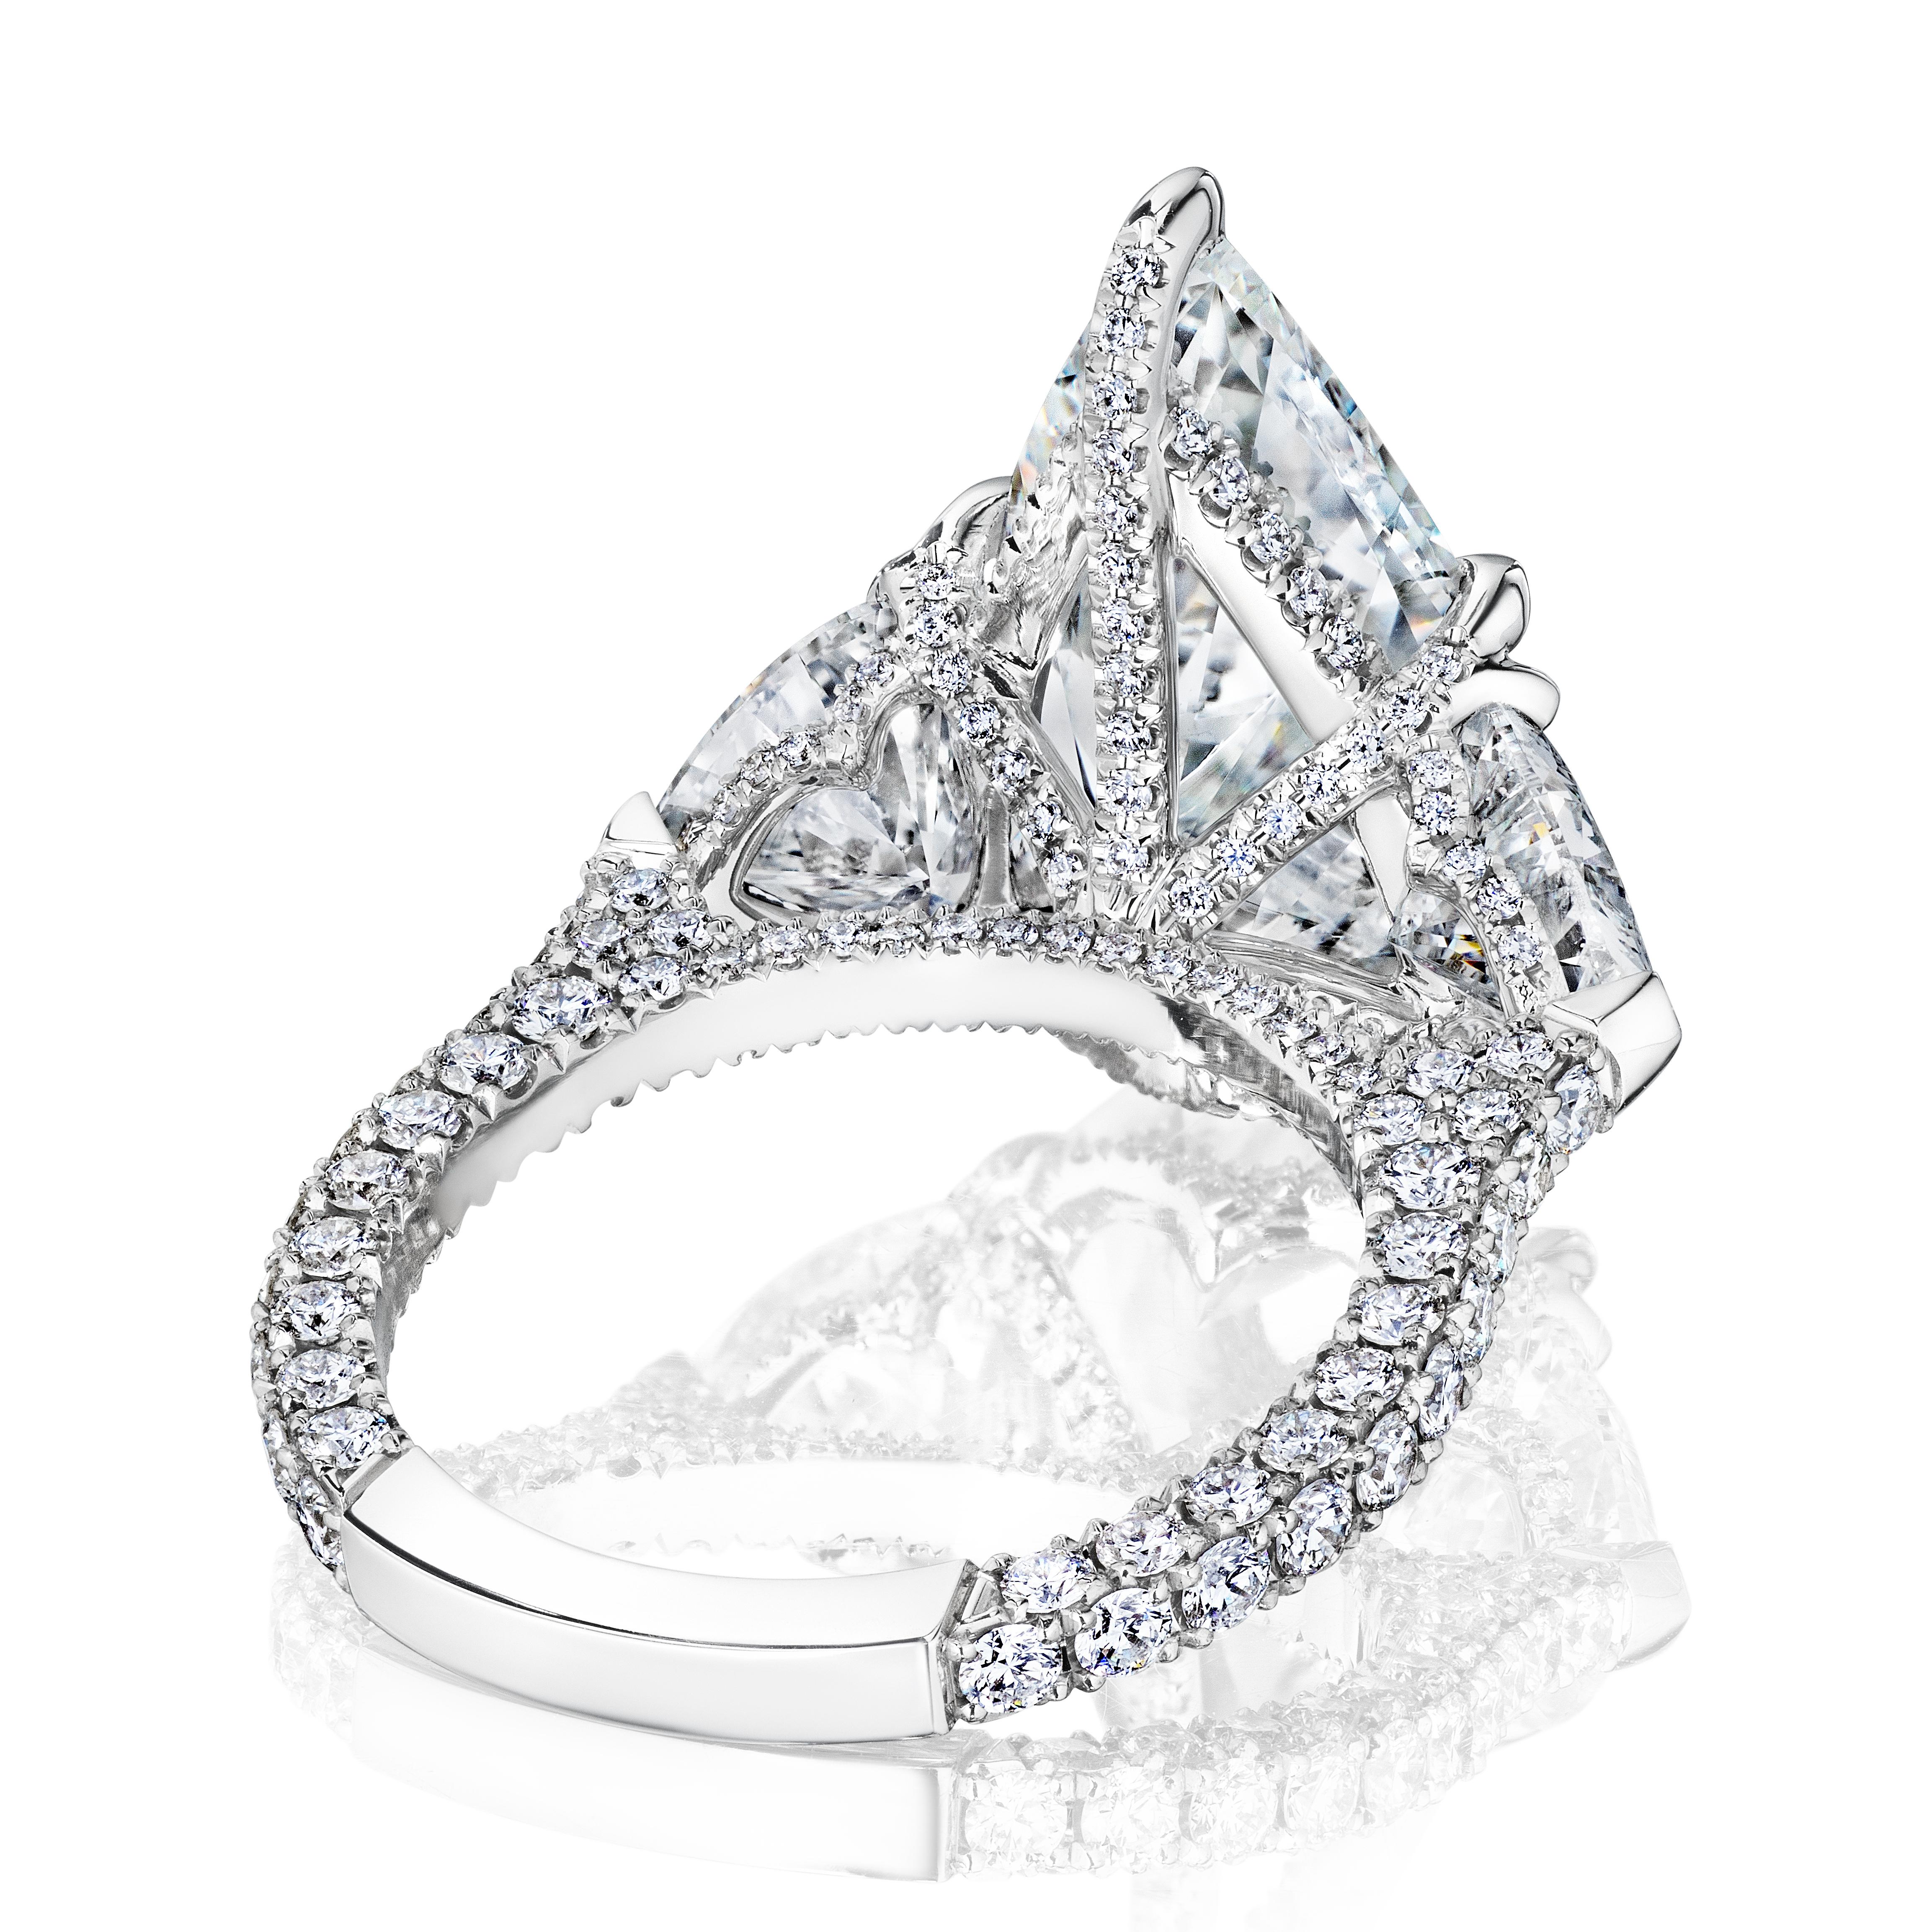 Introducing 'Kristen,' a masterpiece of artistry and elegance, this engagement ring is crowned with a GIA Certified 4.02-carat pear-shaped diamond, boasting a color grading of 'D'—the highest color grade awarded by the Gemological Institute of